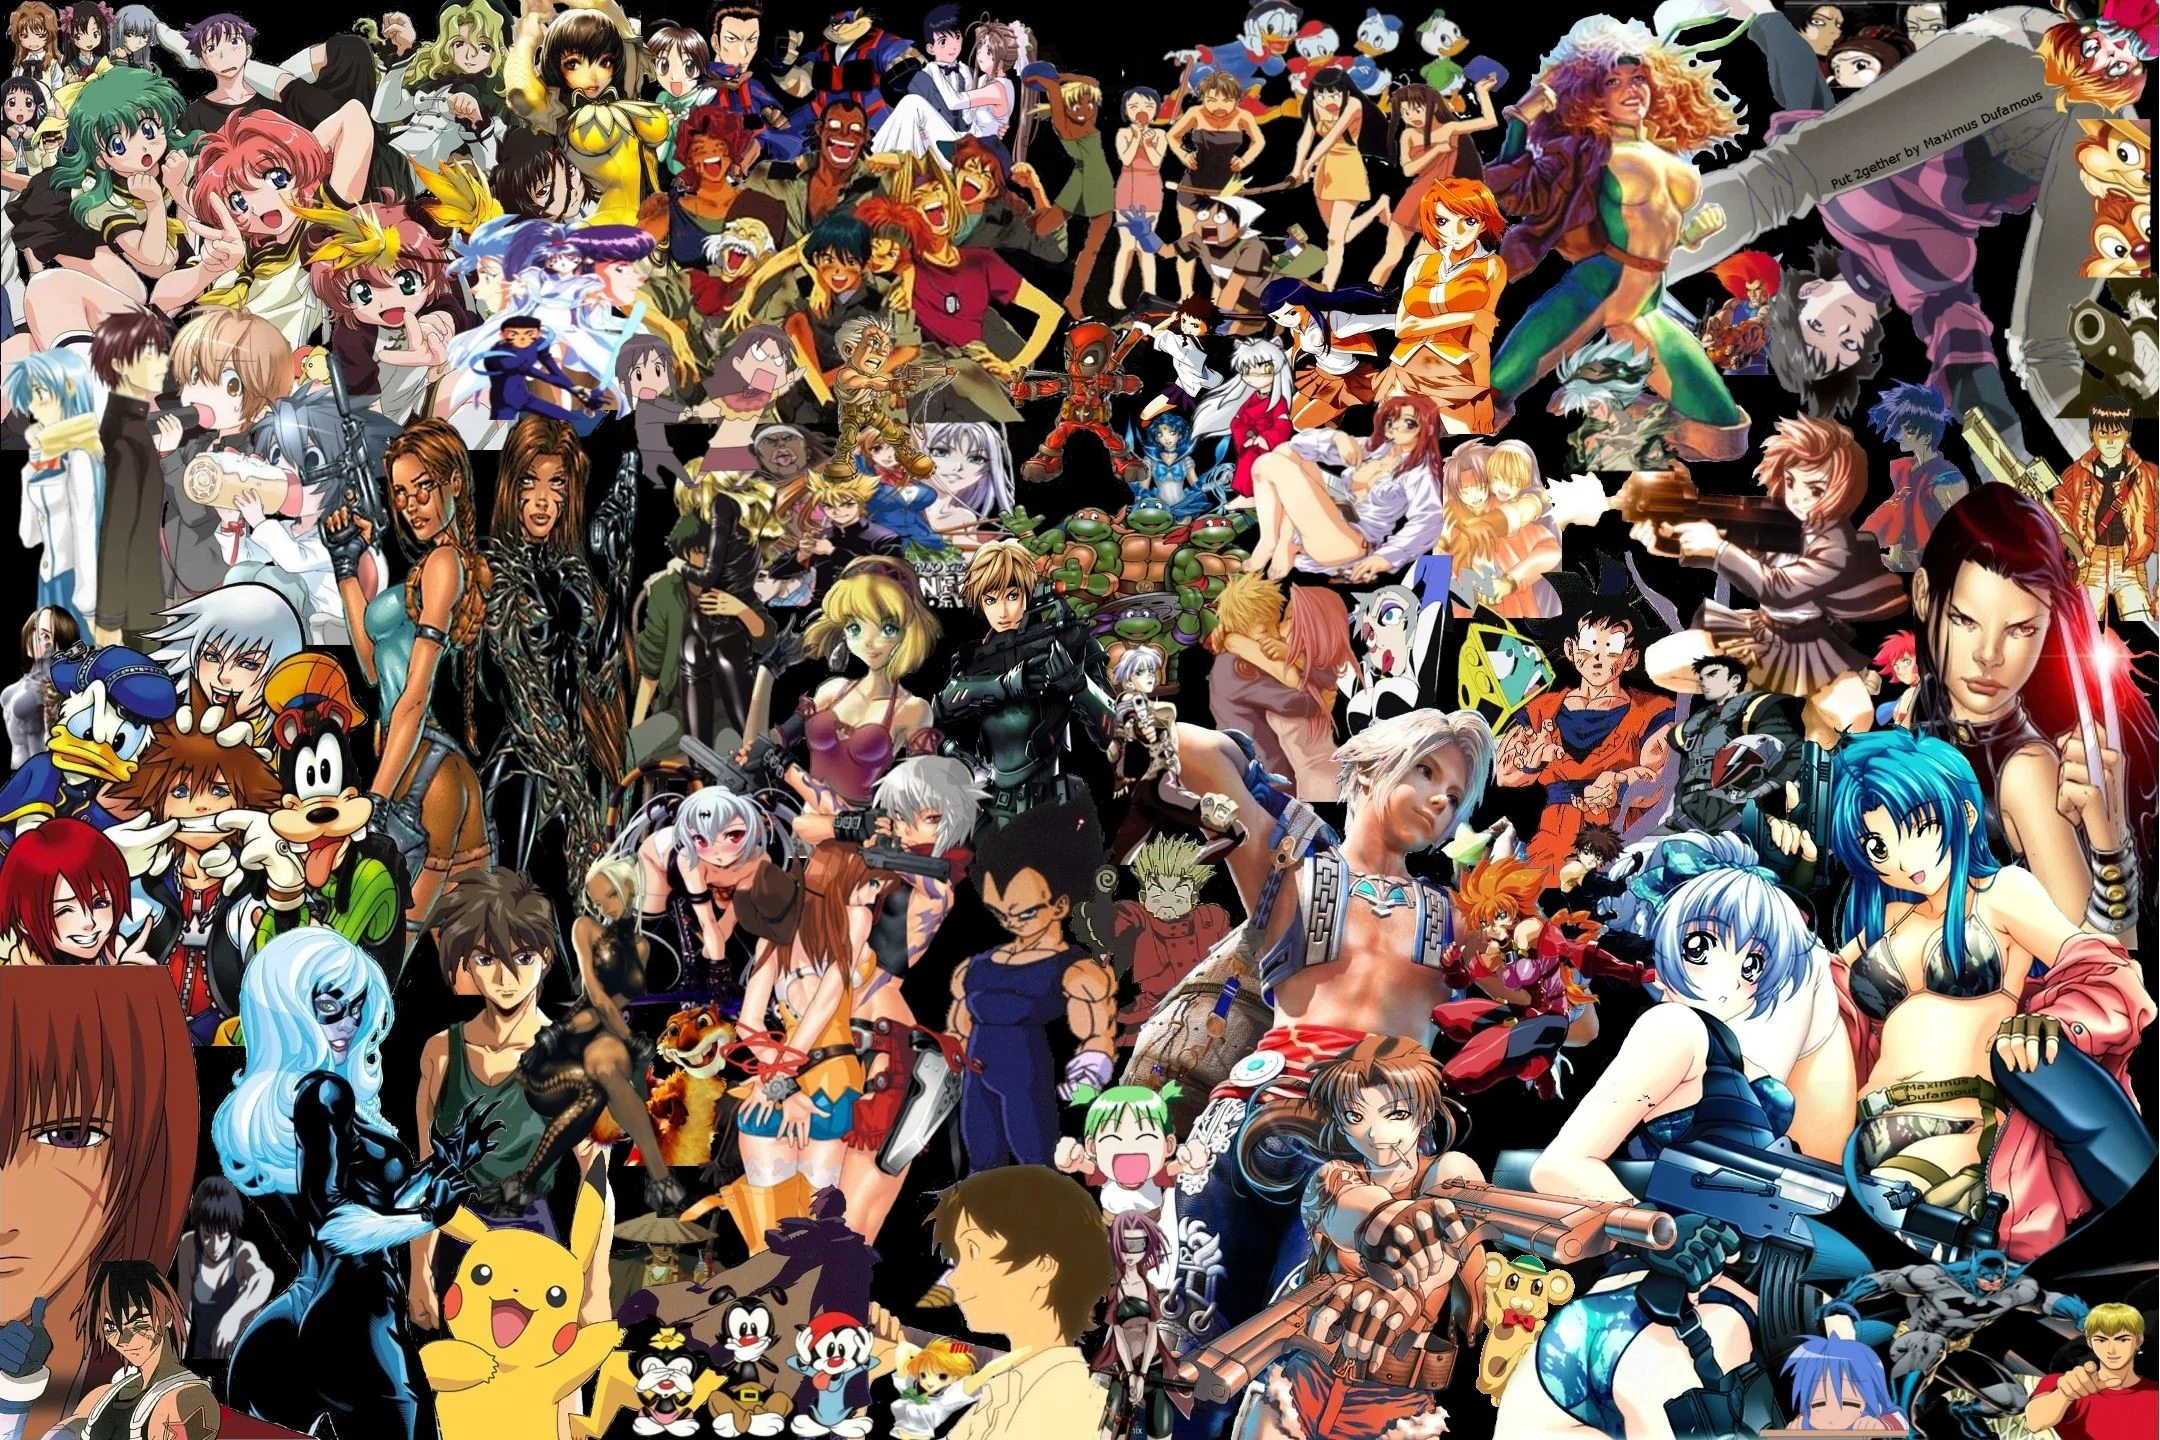 Anime Collage Wallpaper Free Download 14302 – HD Wallpapers Site